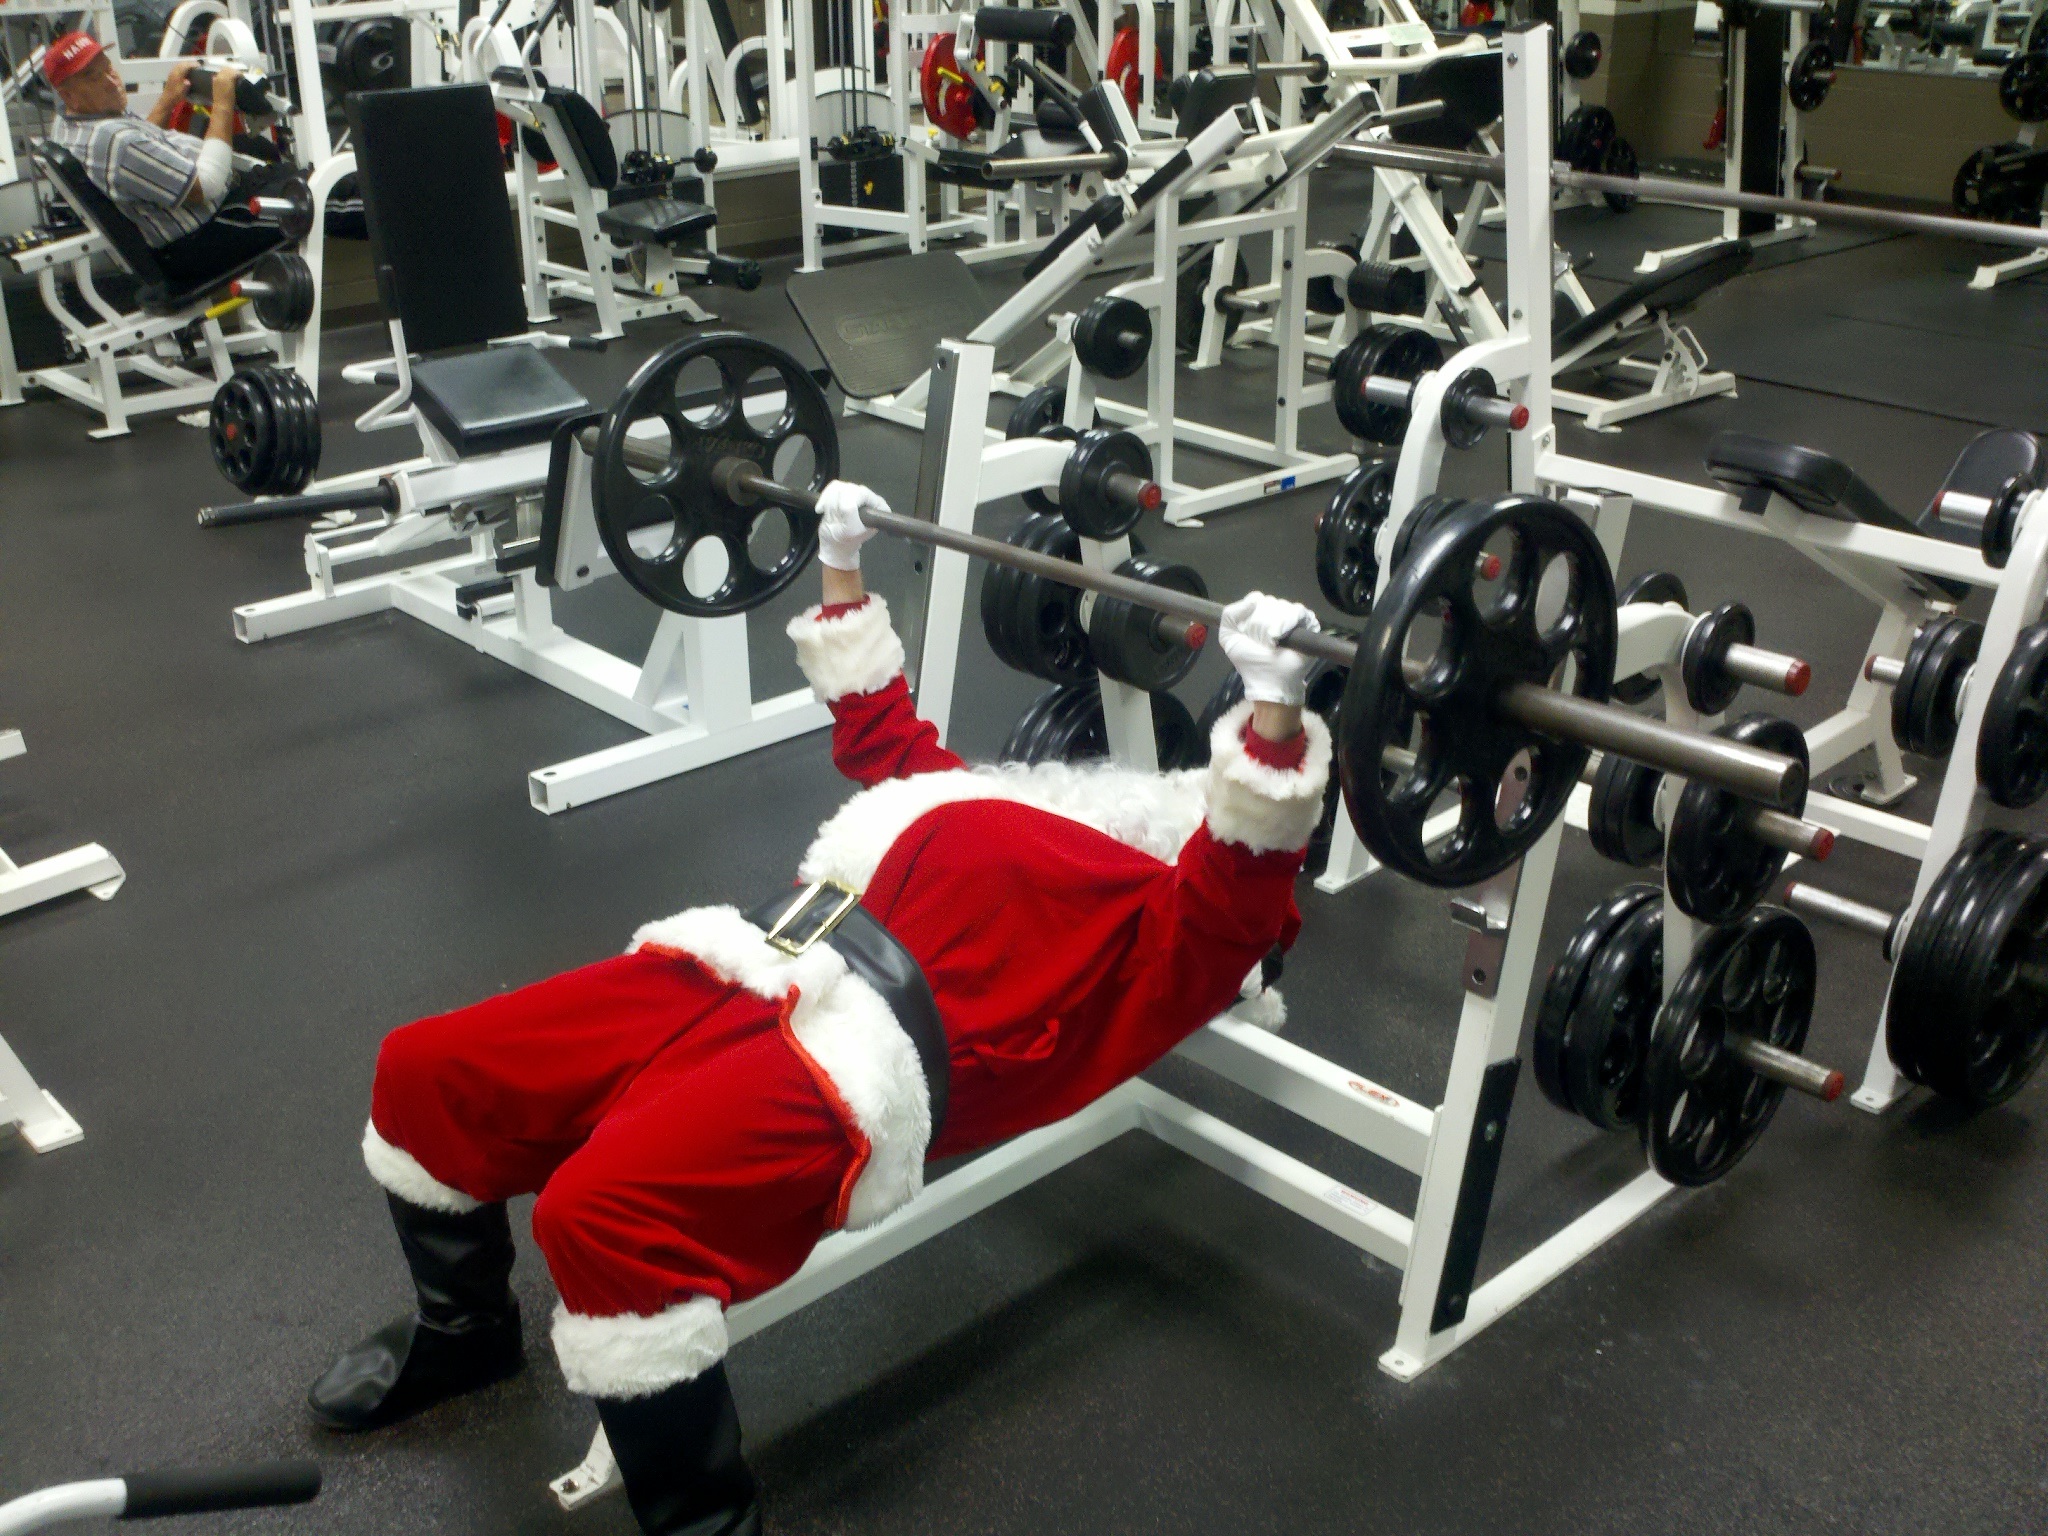 Holiday workout ideas that don't require equipment